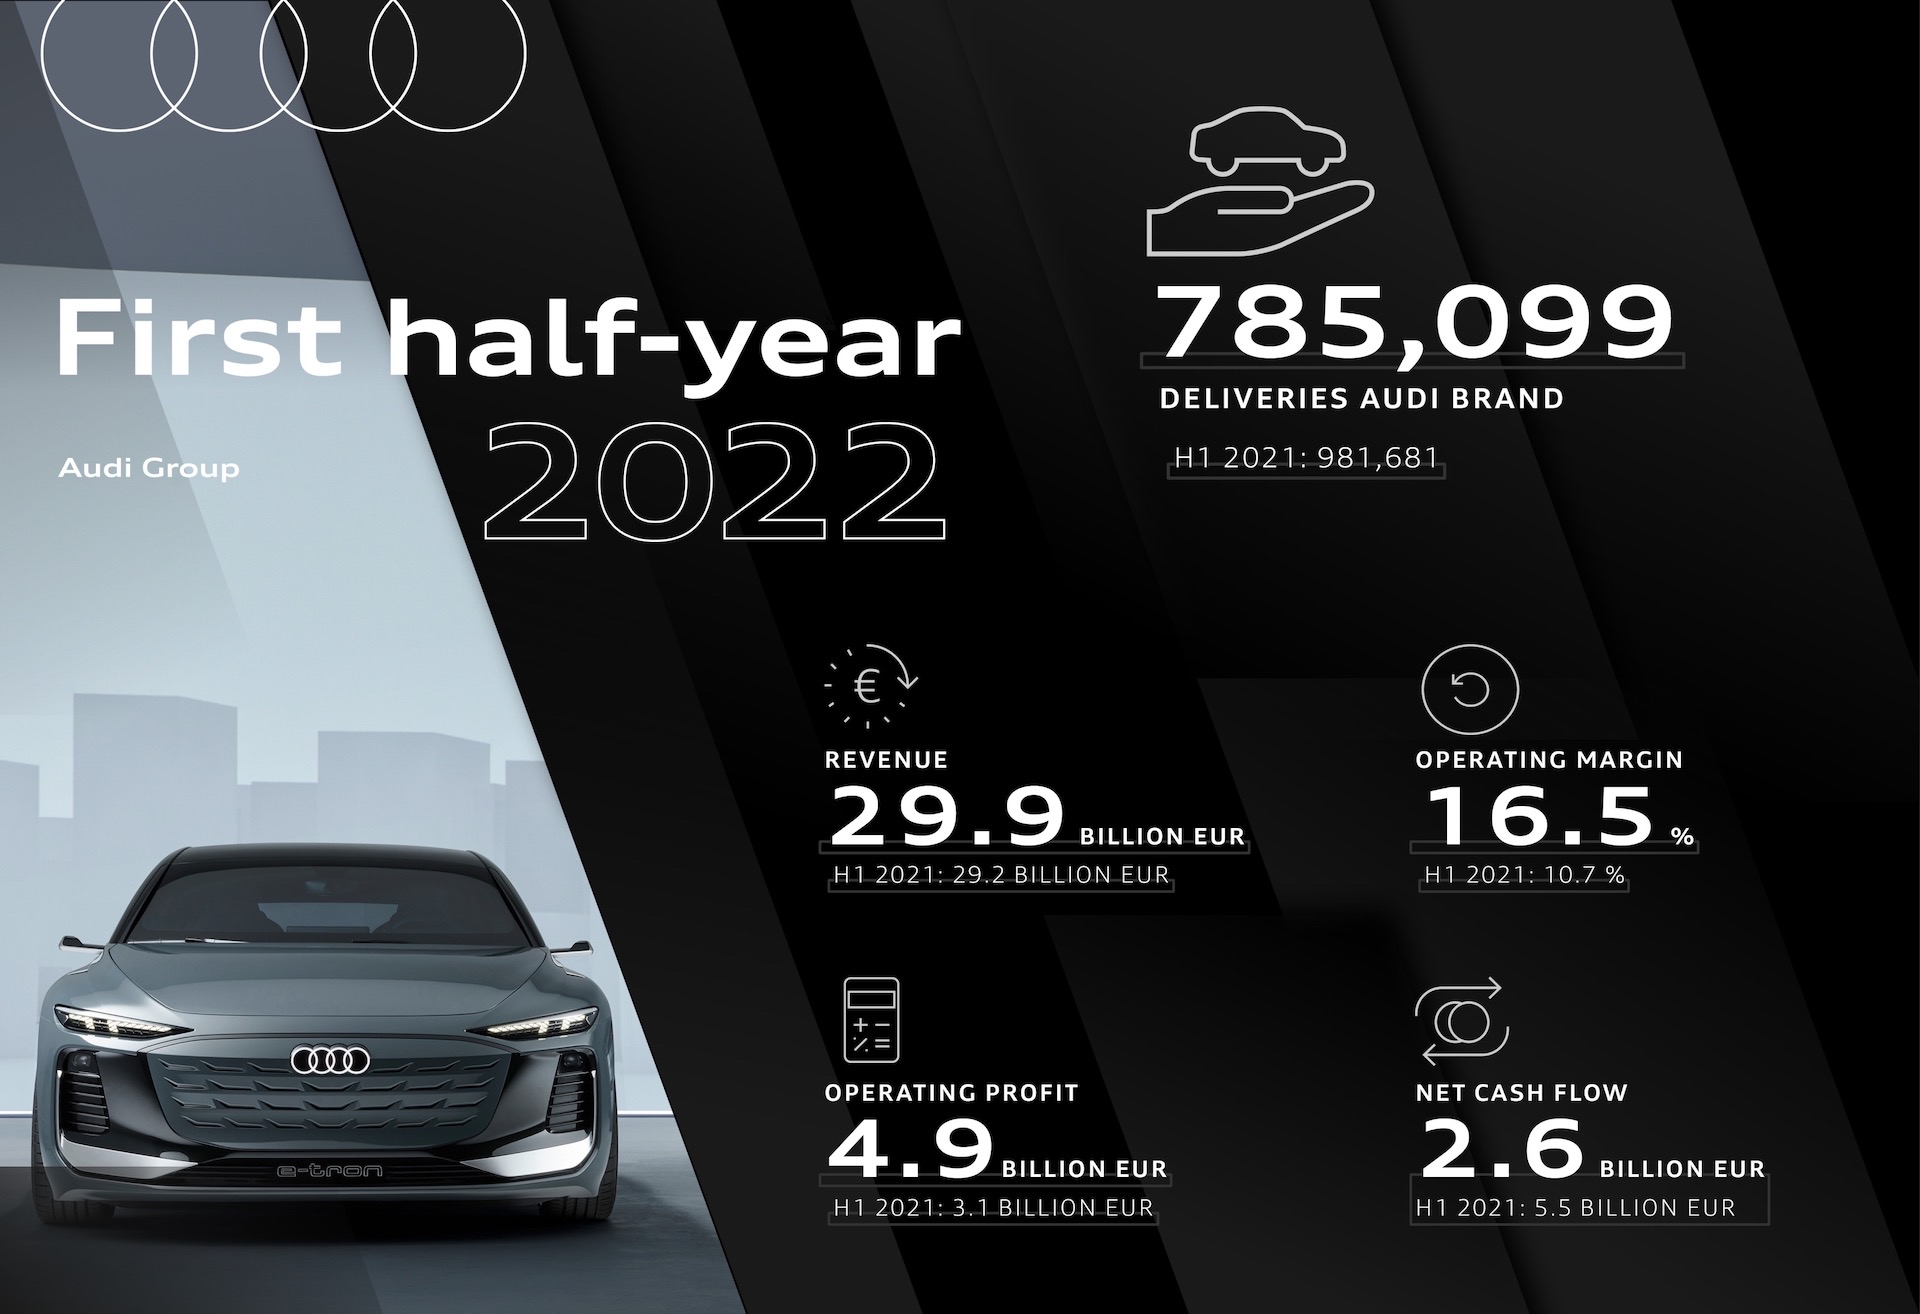 Audi reports recordbreaking profits for H1 2022, deliveries down 20